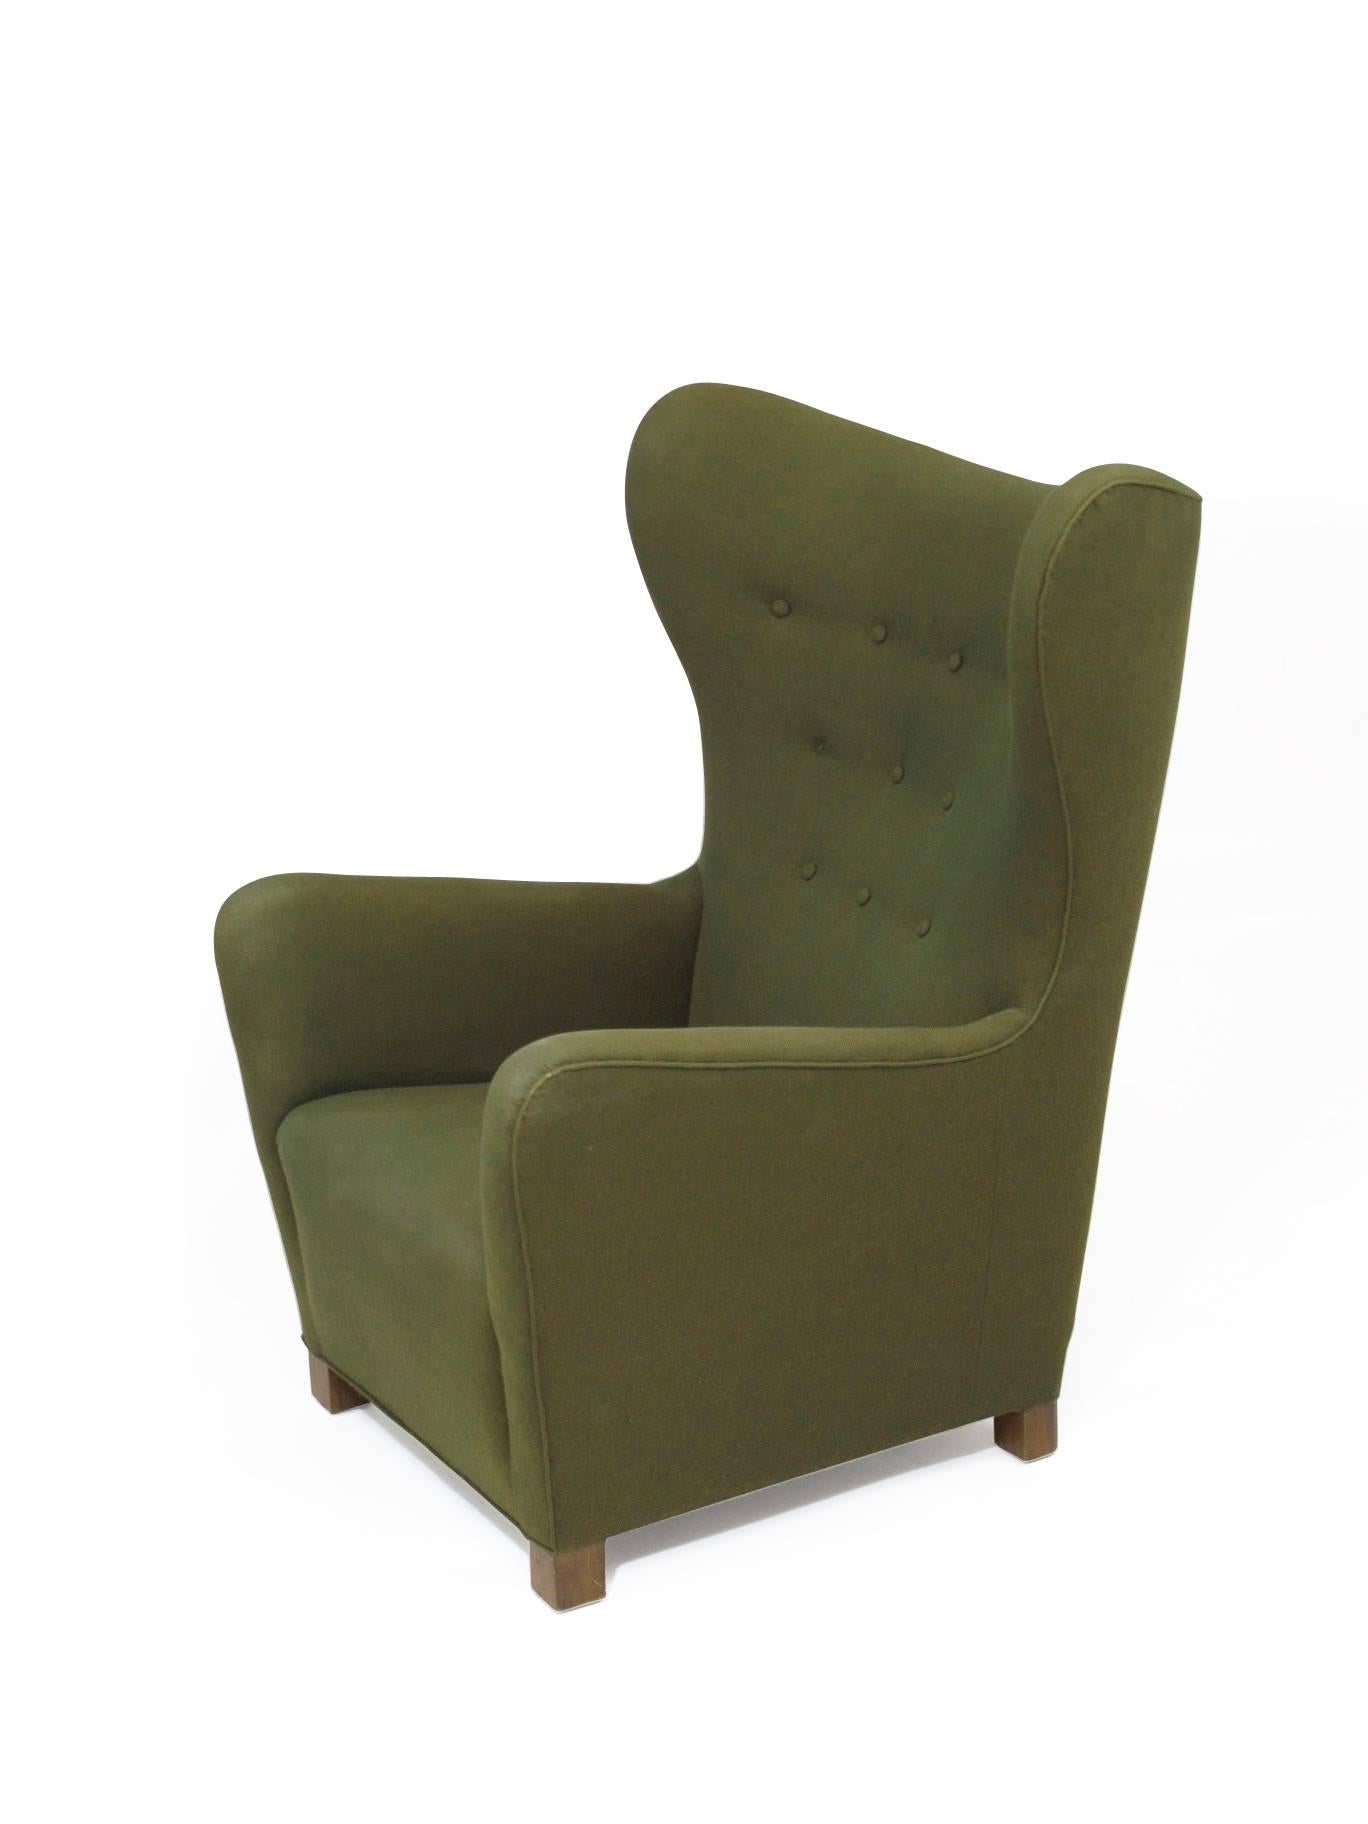 Chris Howard Antiques & Modern presents this early midcentury Danish high back lounge chair handcrafted at Fritz Hansen, circa 1942. Features a solid wood frame, with copper coil springs and horsehair padding covered in the original green wool